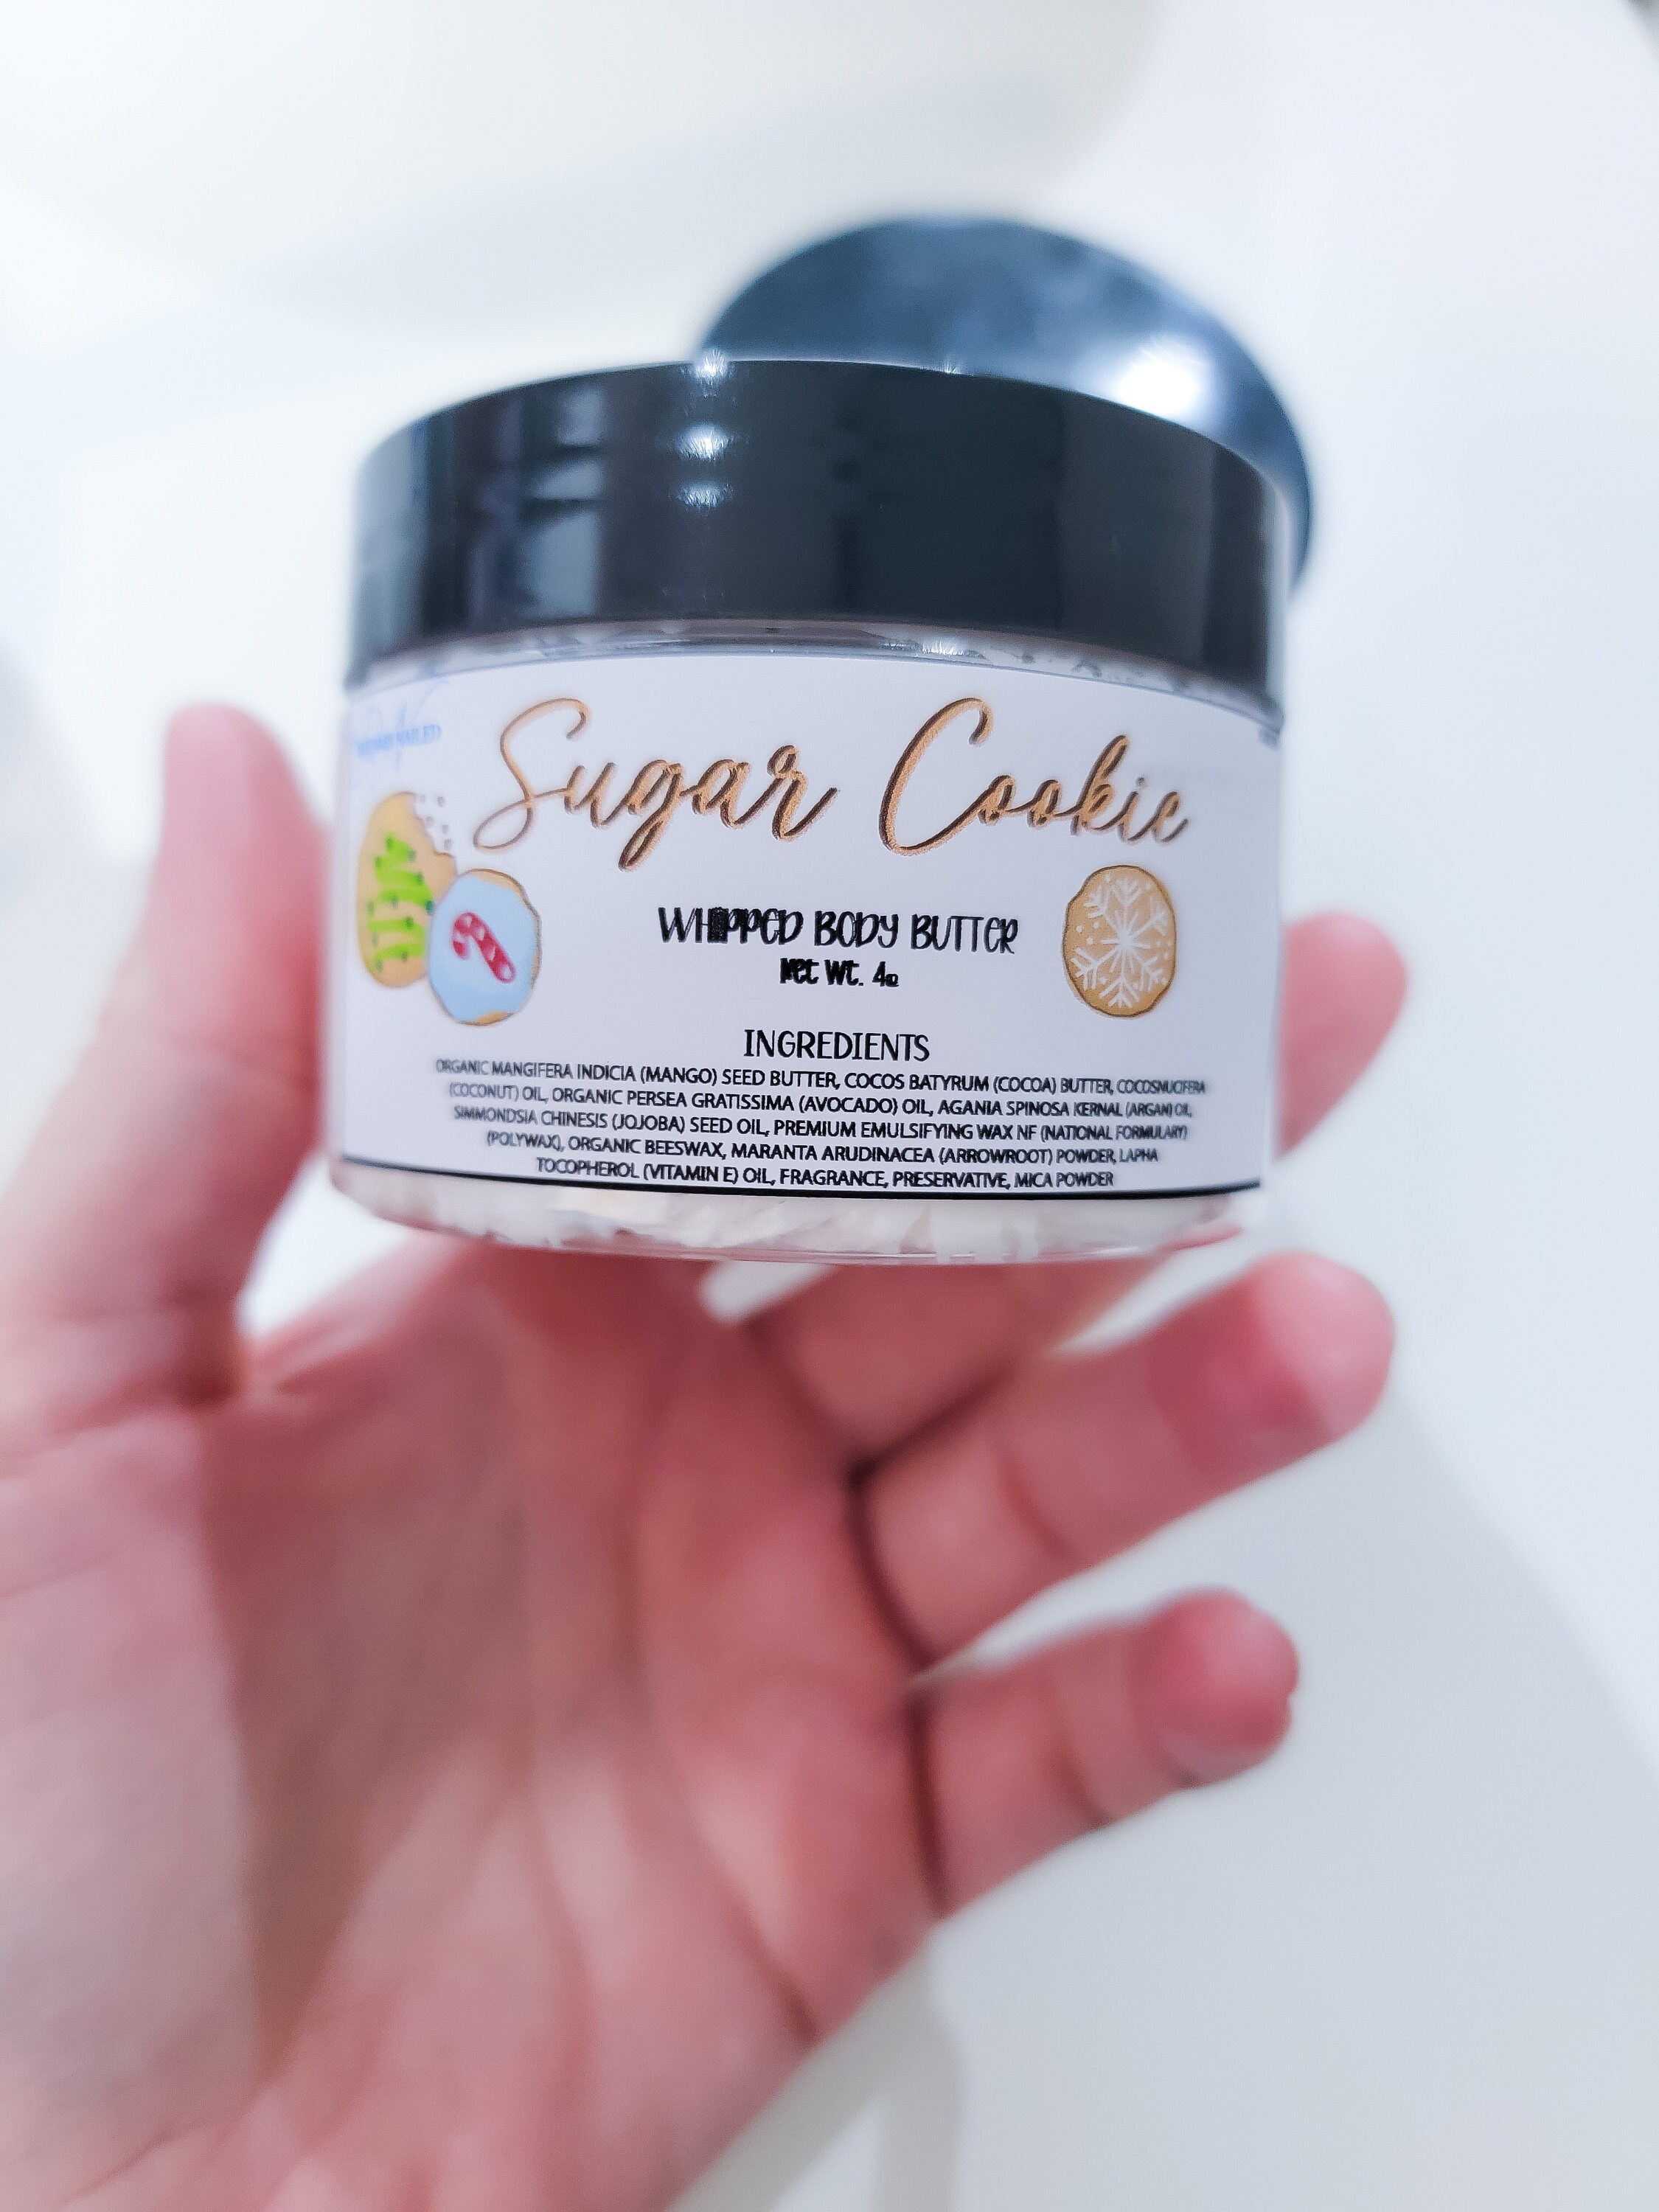 Sugar Cookies Whipped Body Butter